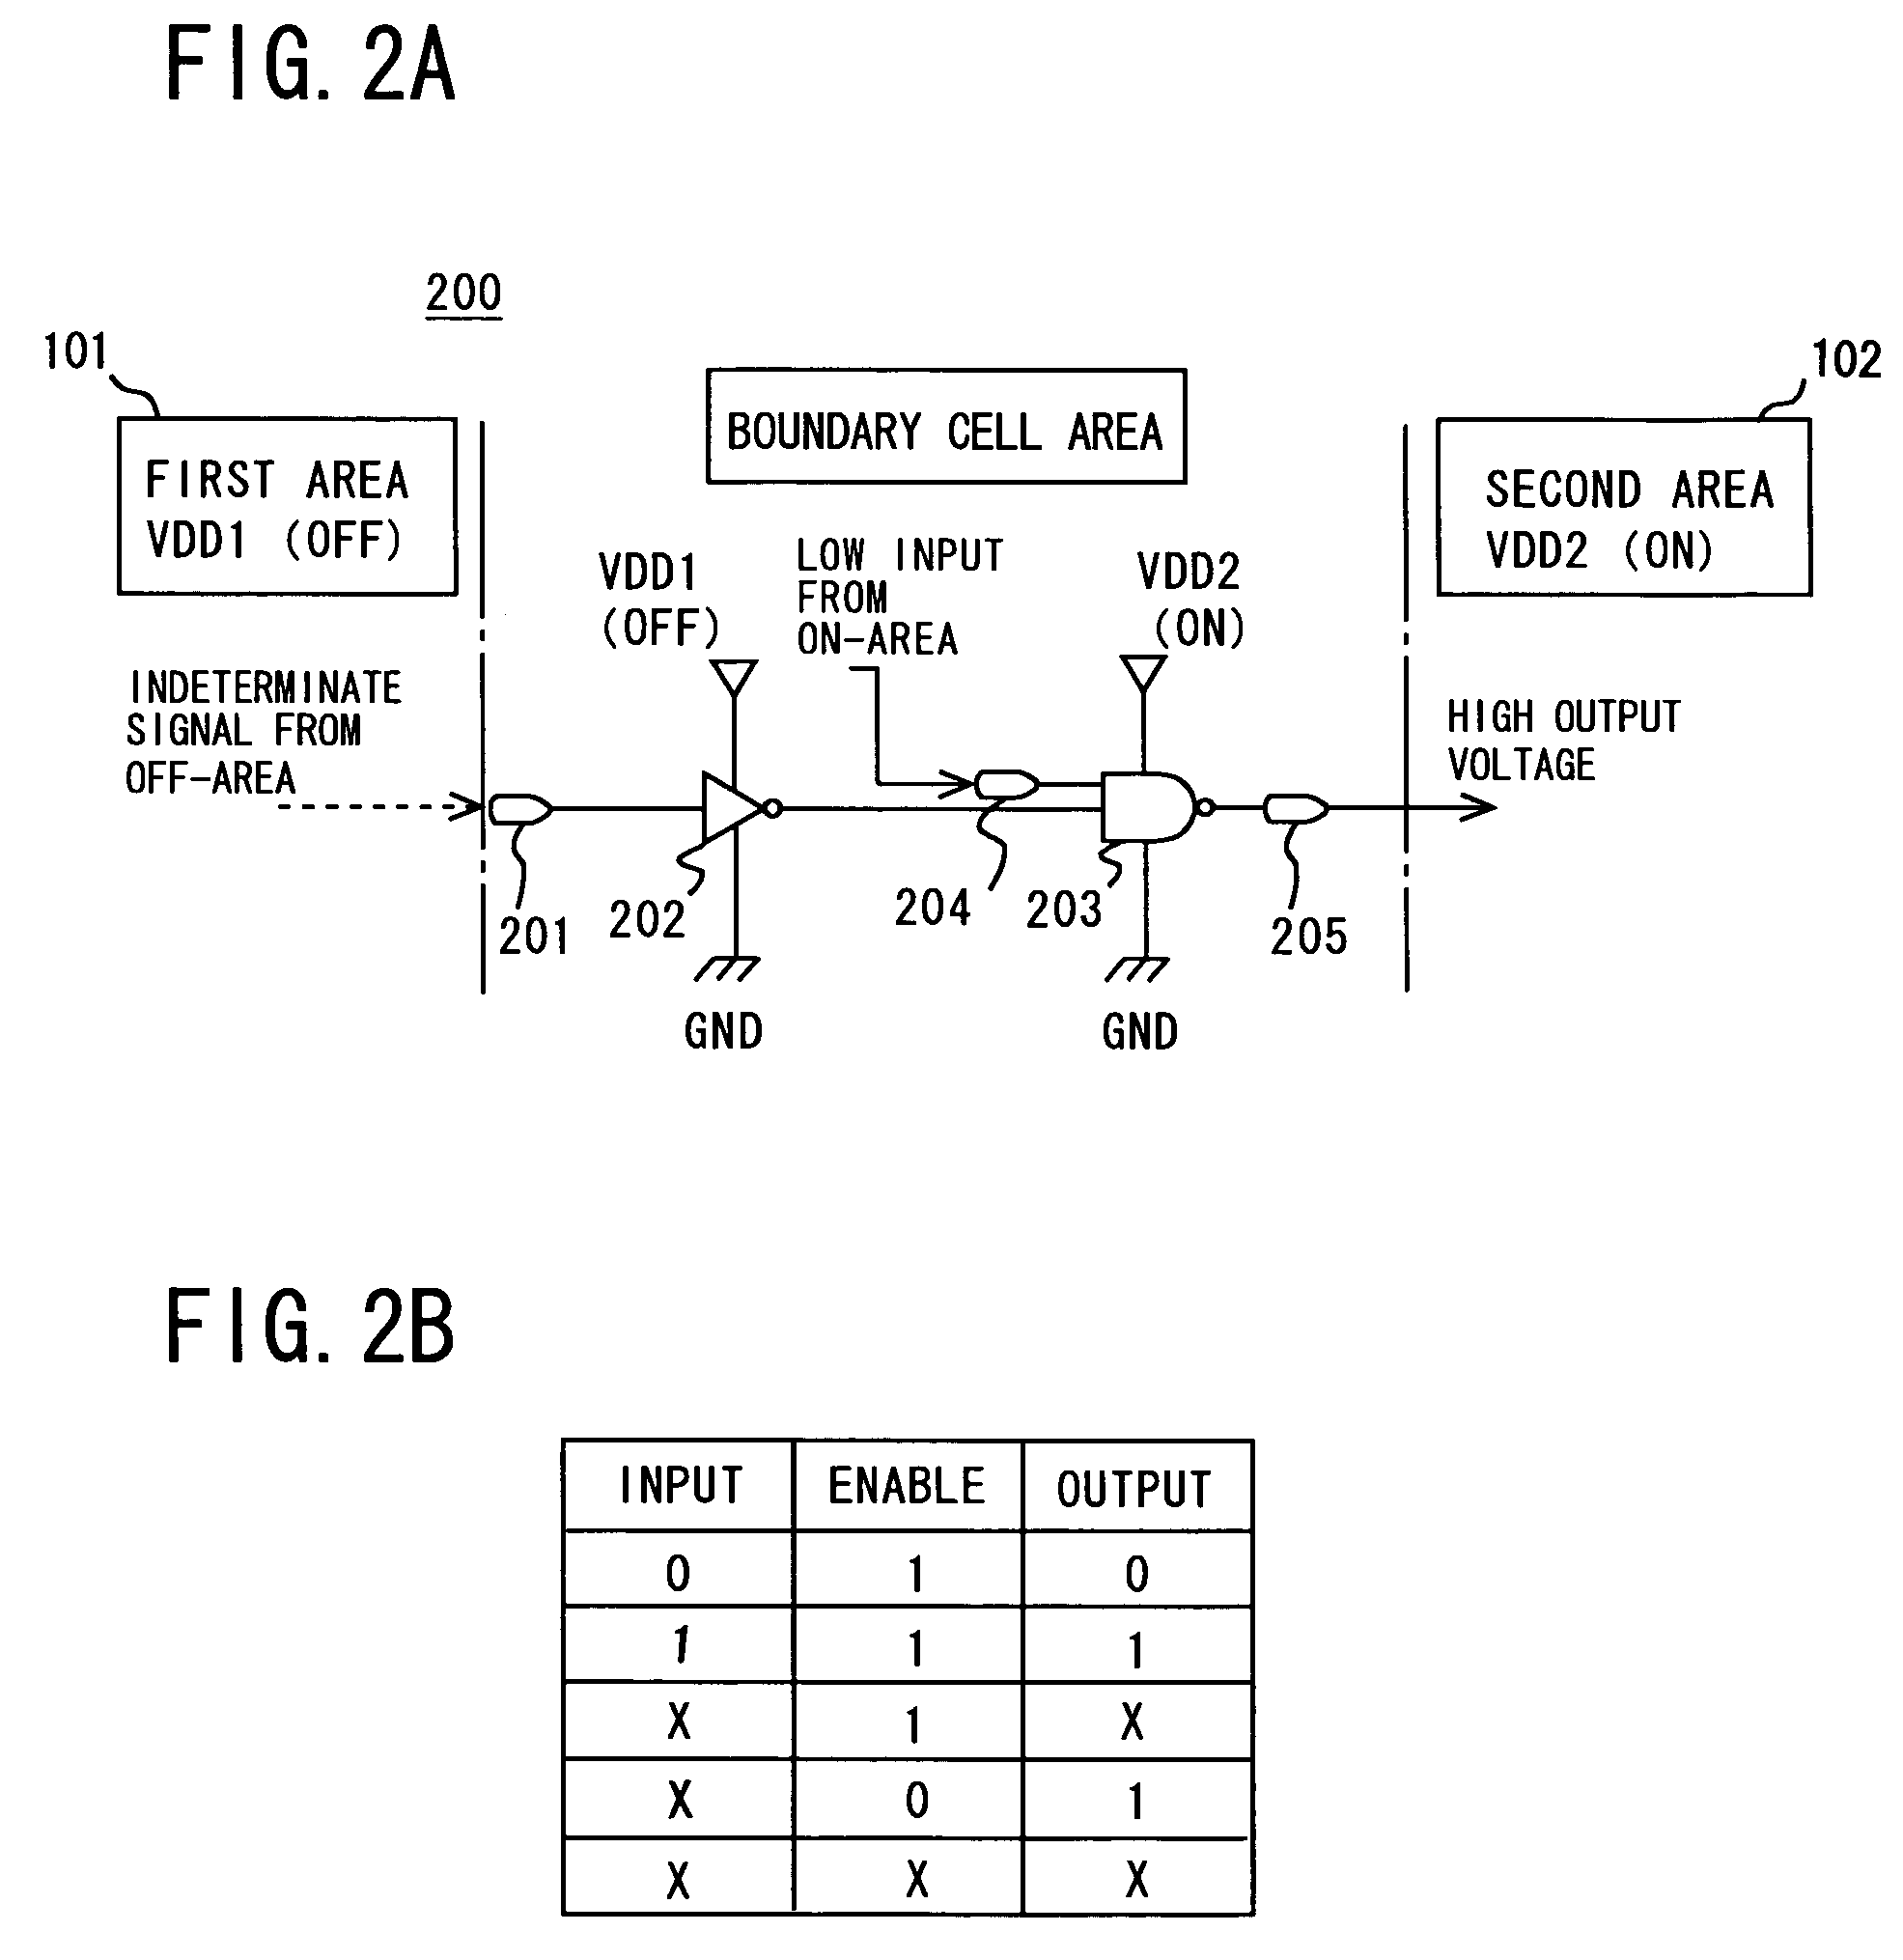 Method for designing semiconductor circuit device, utilizing boundary cells between first and second circuits driven by different power supply systems